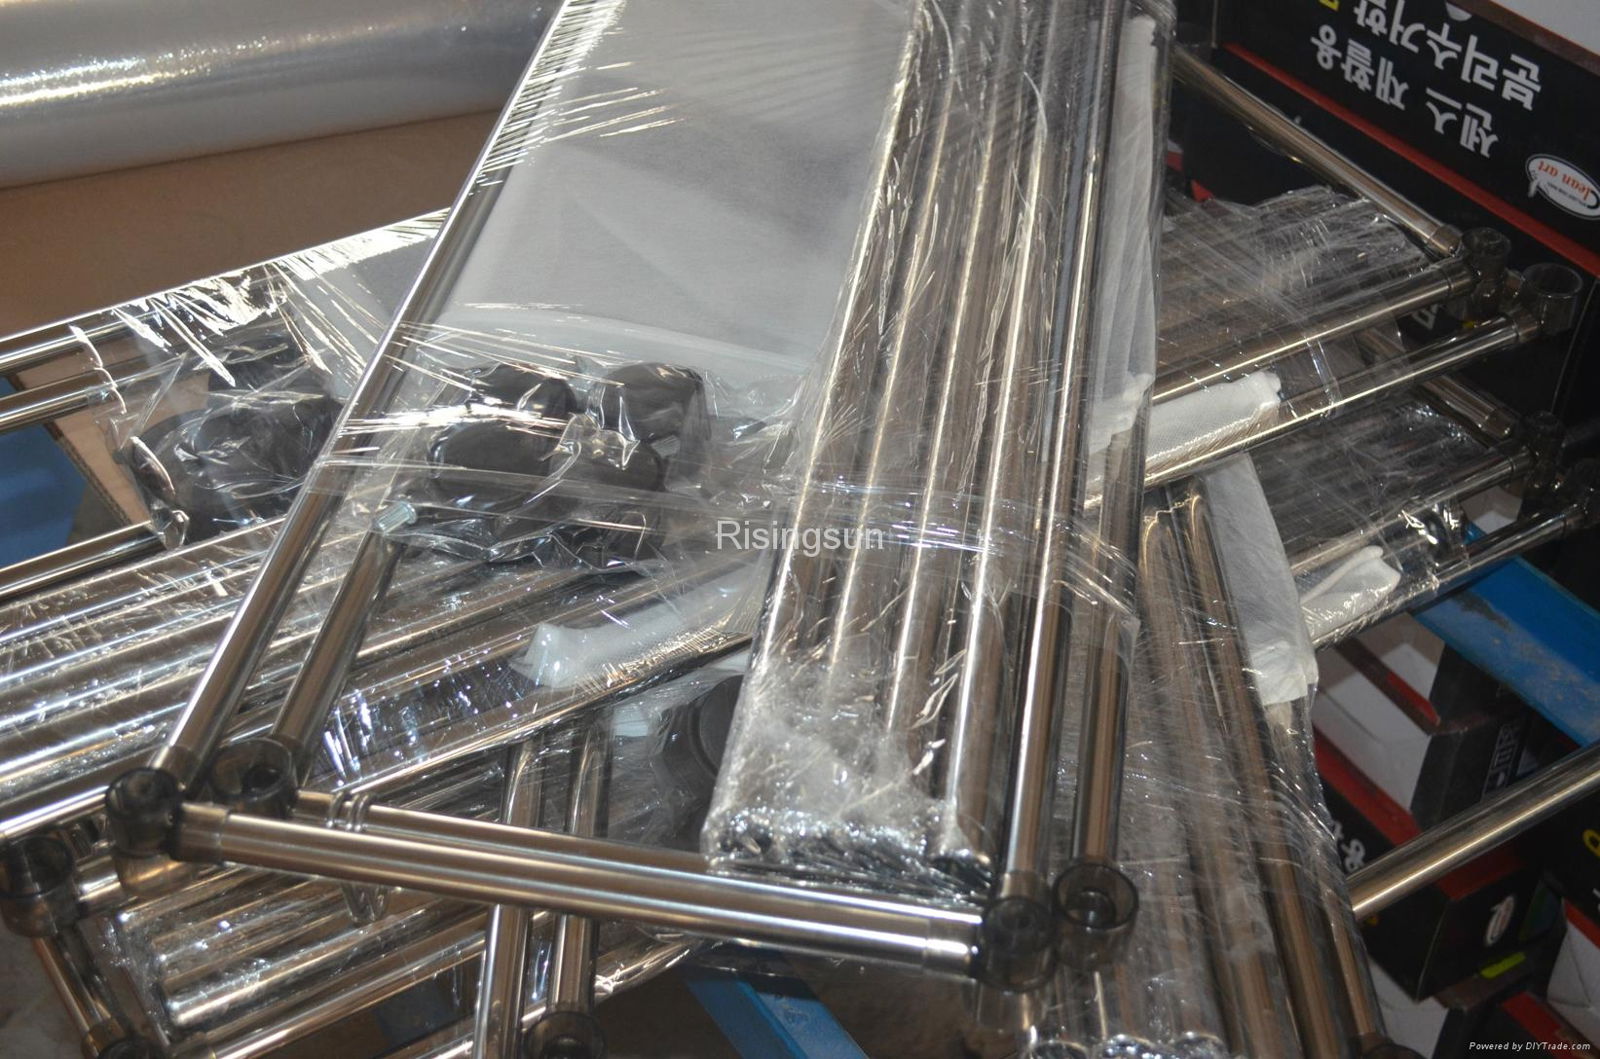 Professional custom all kinds of garbage frame trolley 3